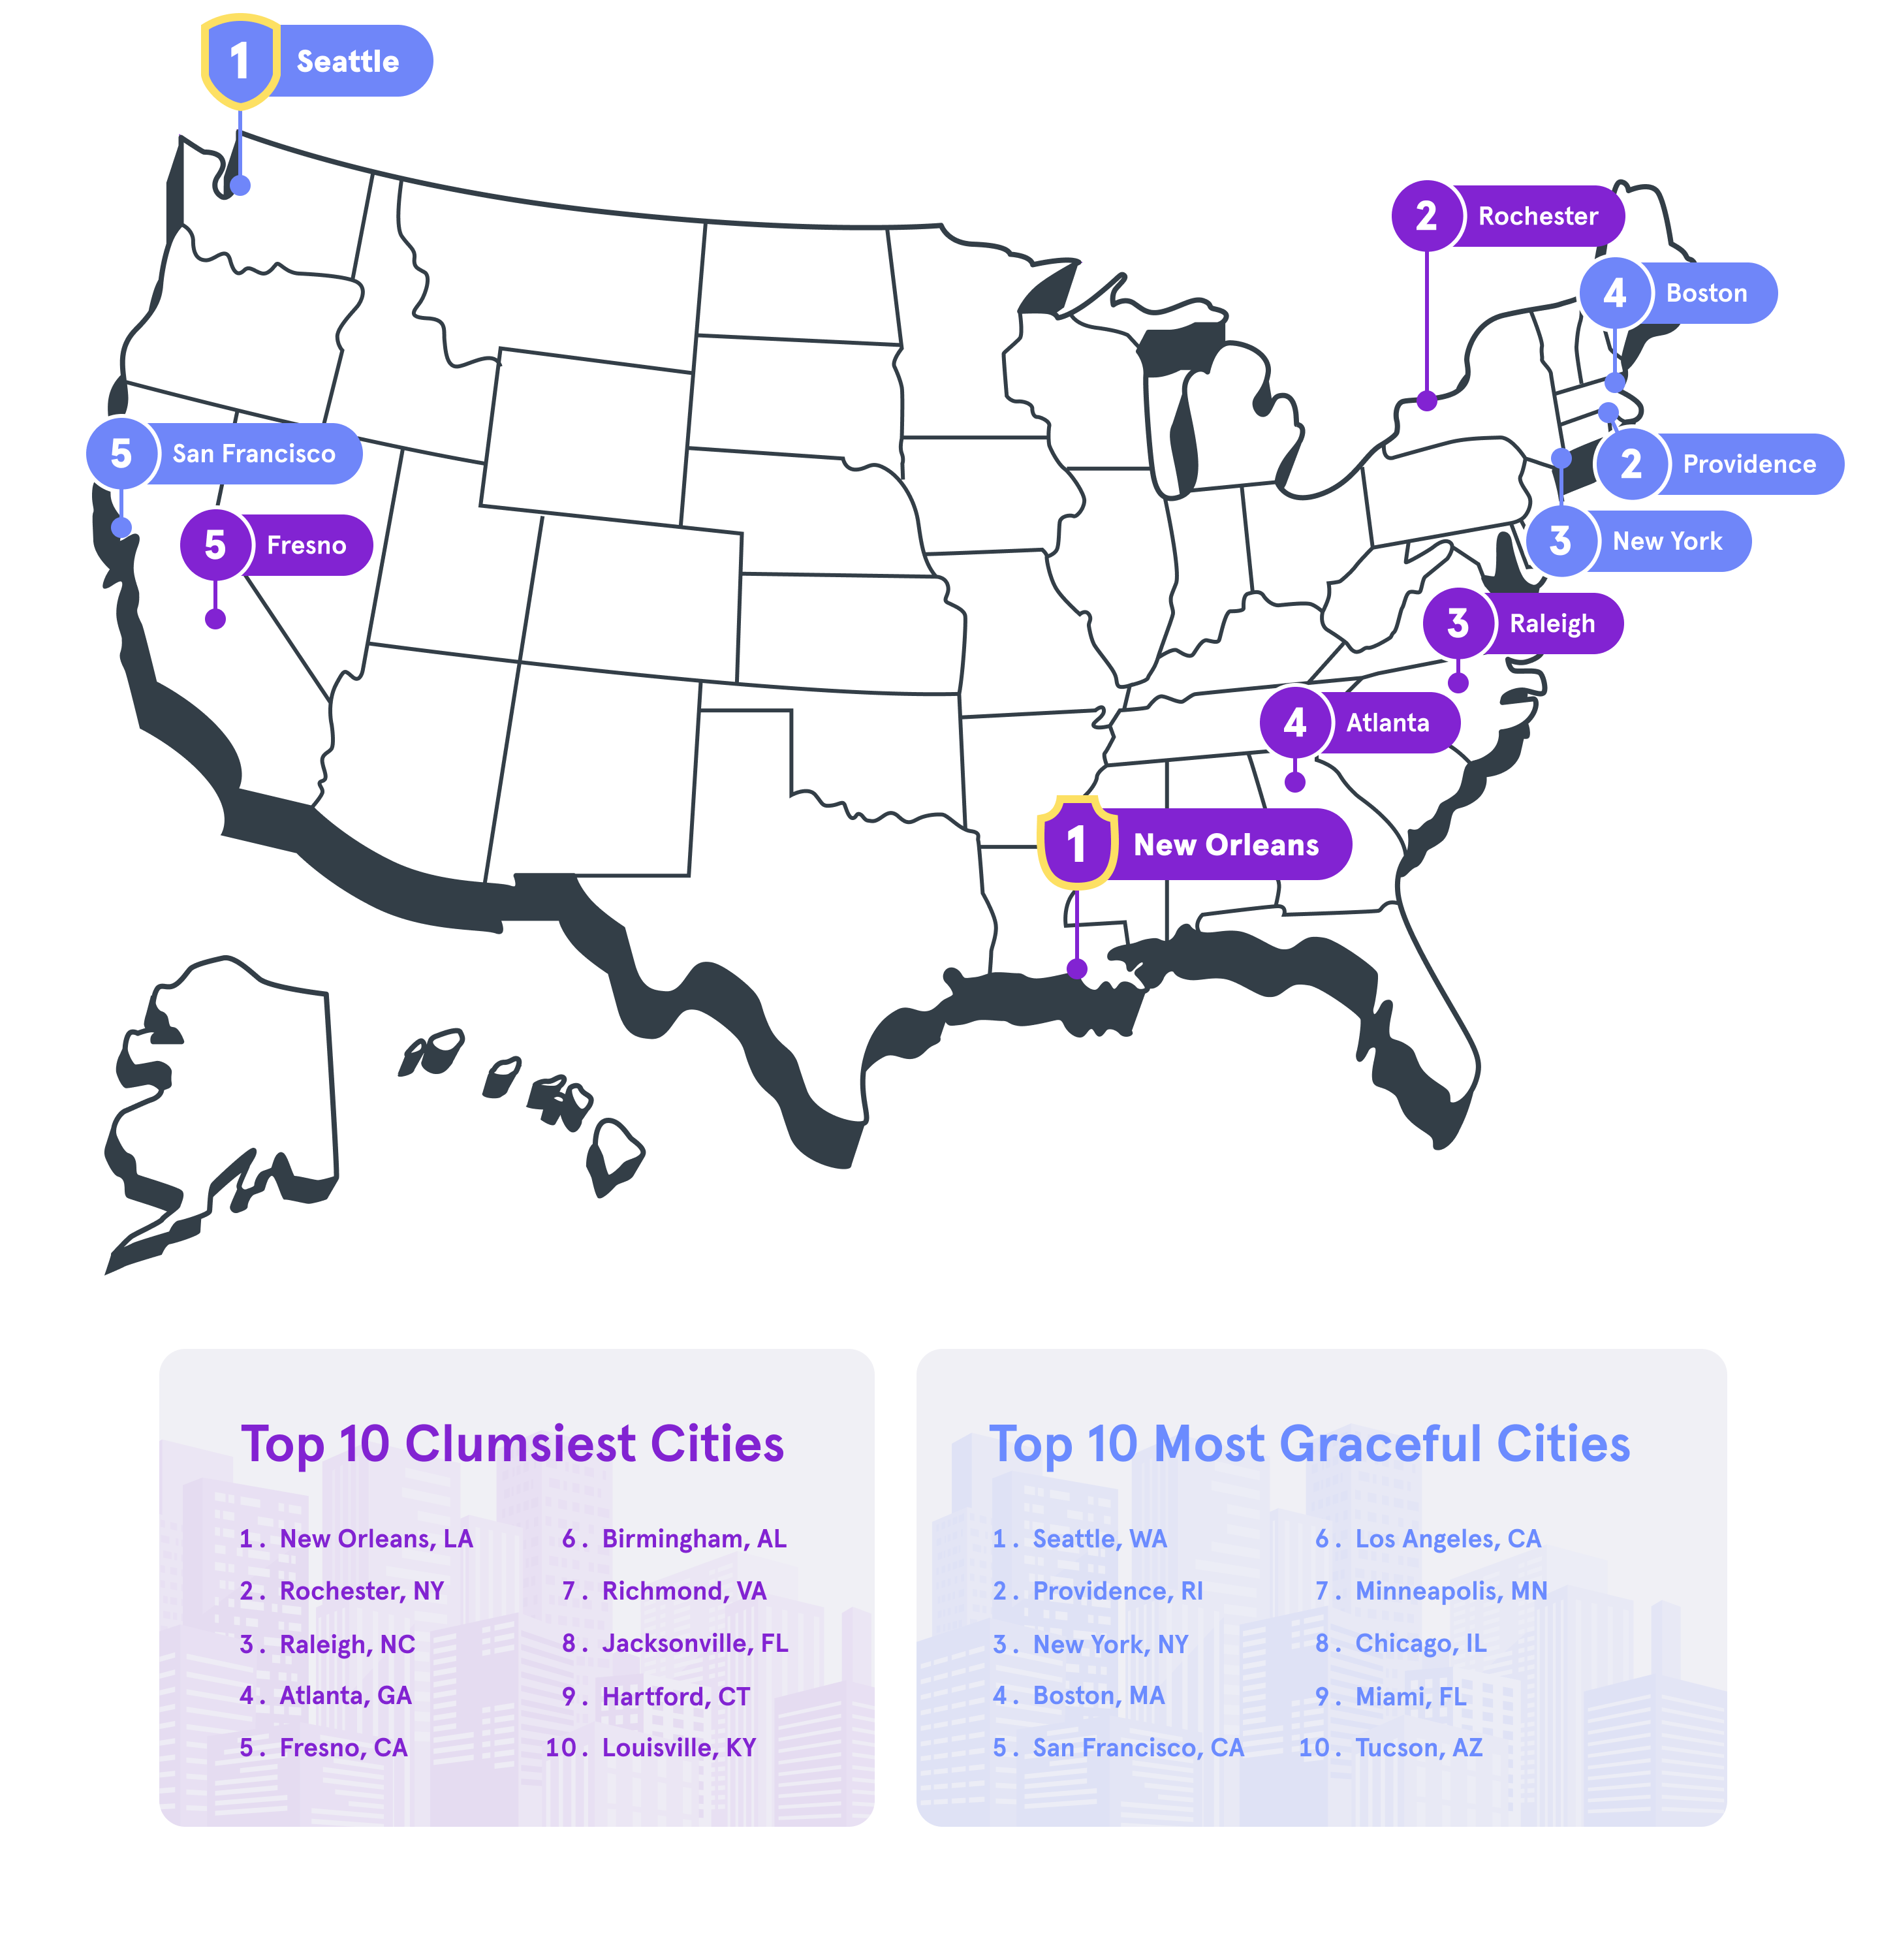 Clumsiest cities = New Orleans, Rochester, Raleigh, Atlanta, Fresno. Most graceful cities = Seattle, Providence, New York, Boston, San Francisco